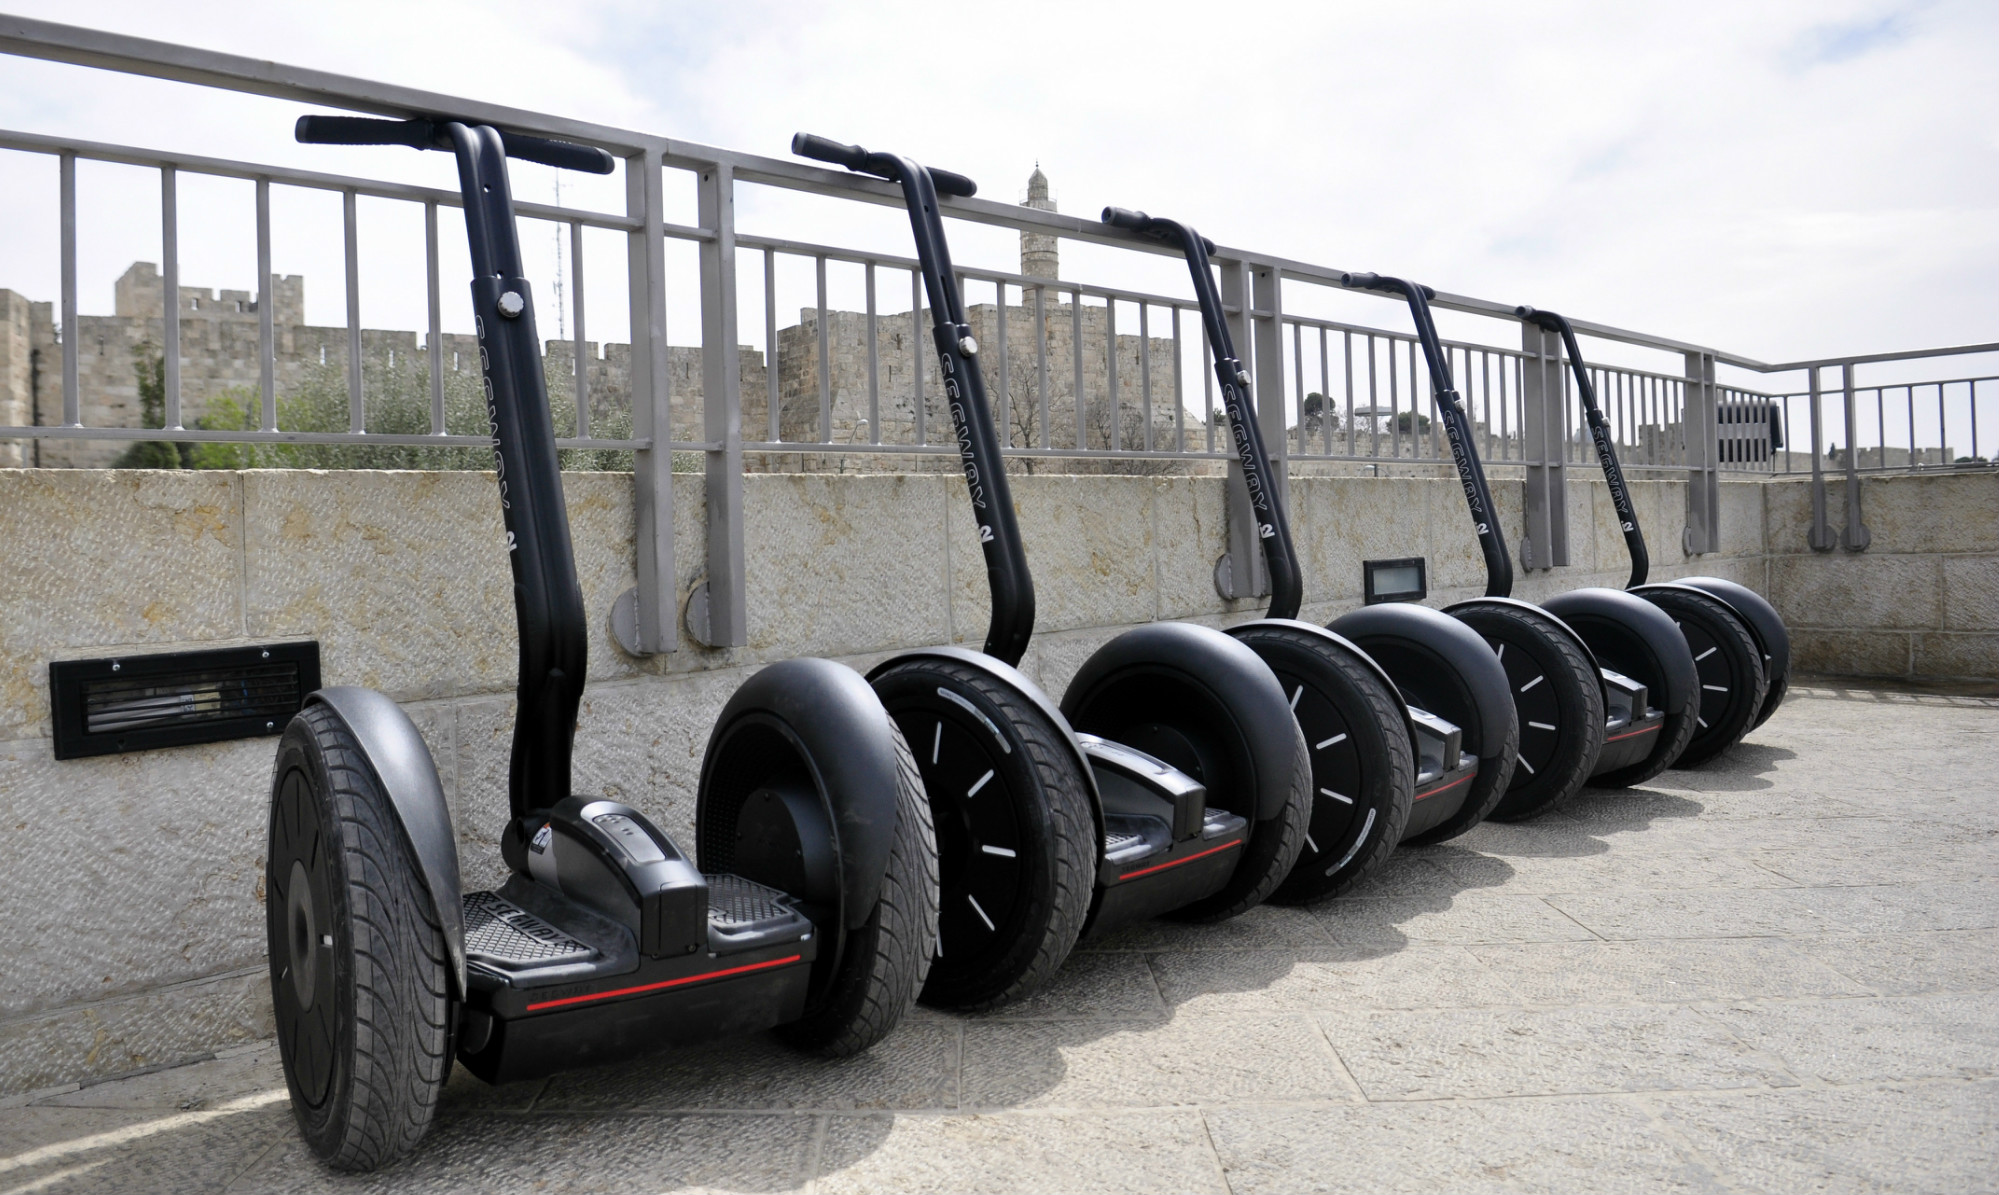 The story of the Lost Train Segway Tour